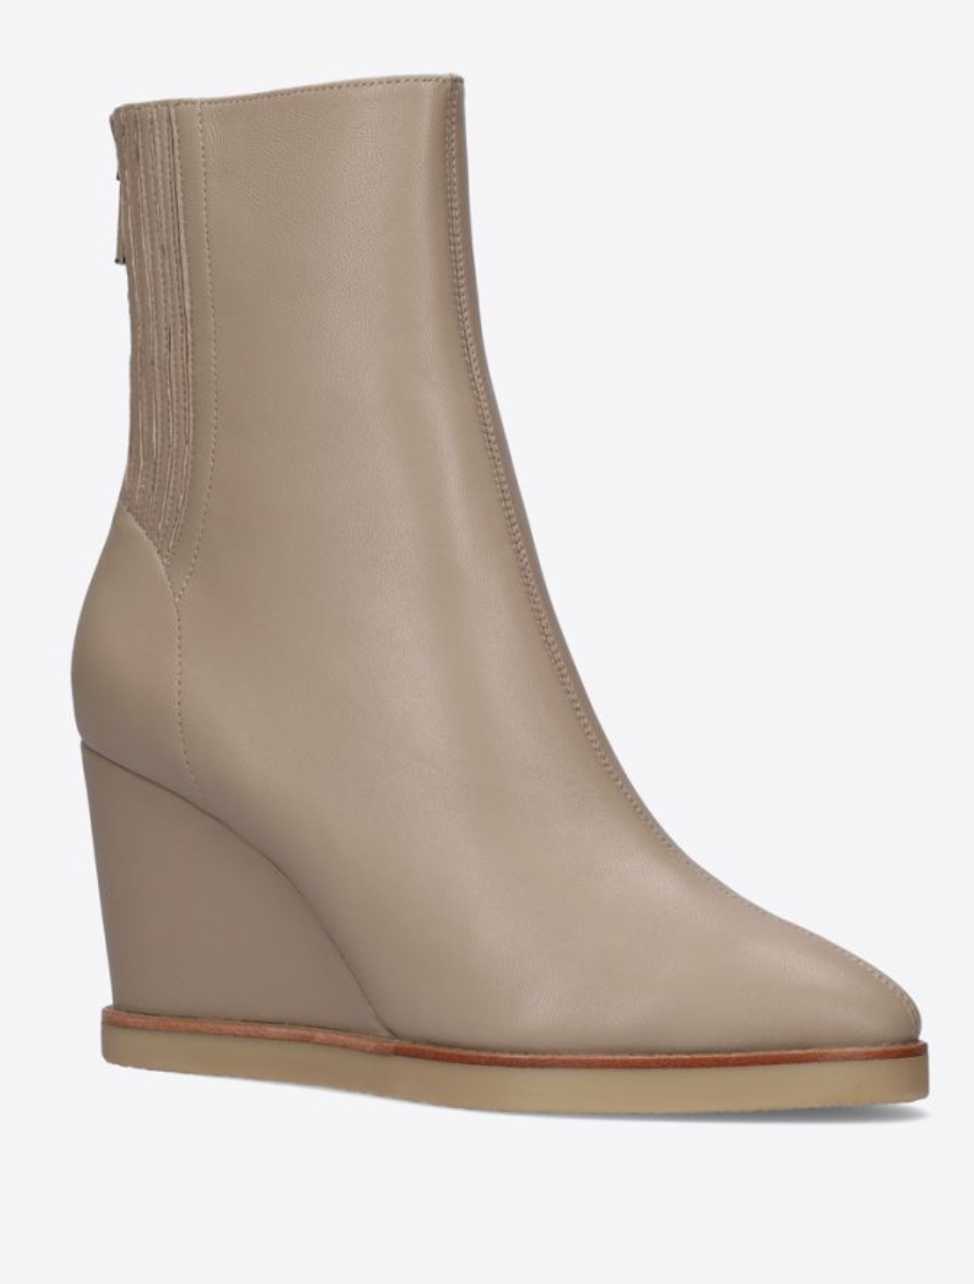 Hetre Alresford Hampshire Shoe Store Lola Cruz Clay Leather Wedge Ankle Boot  